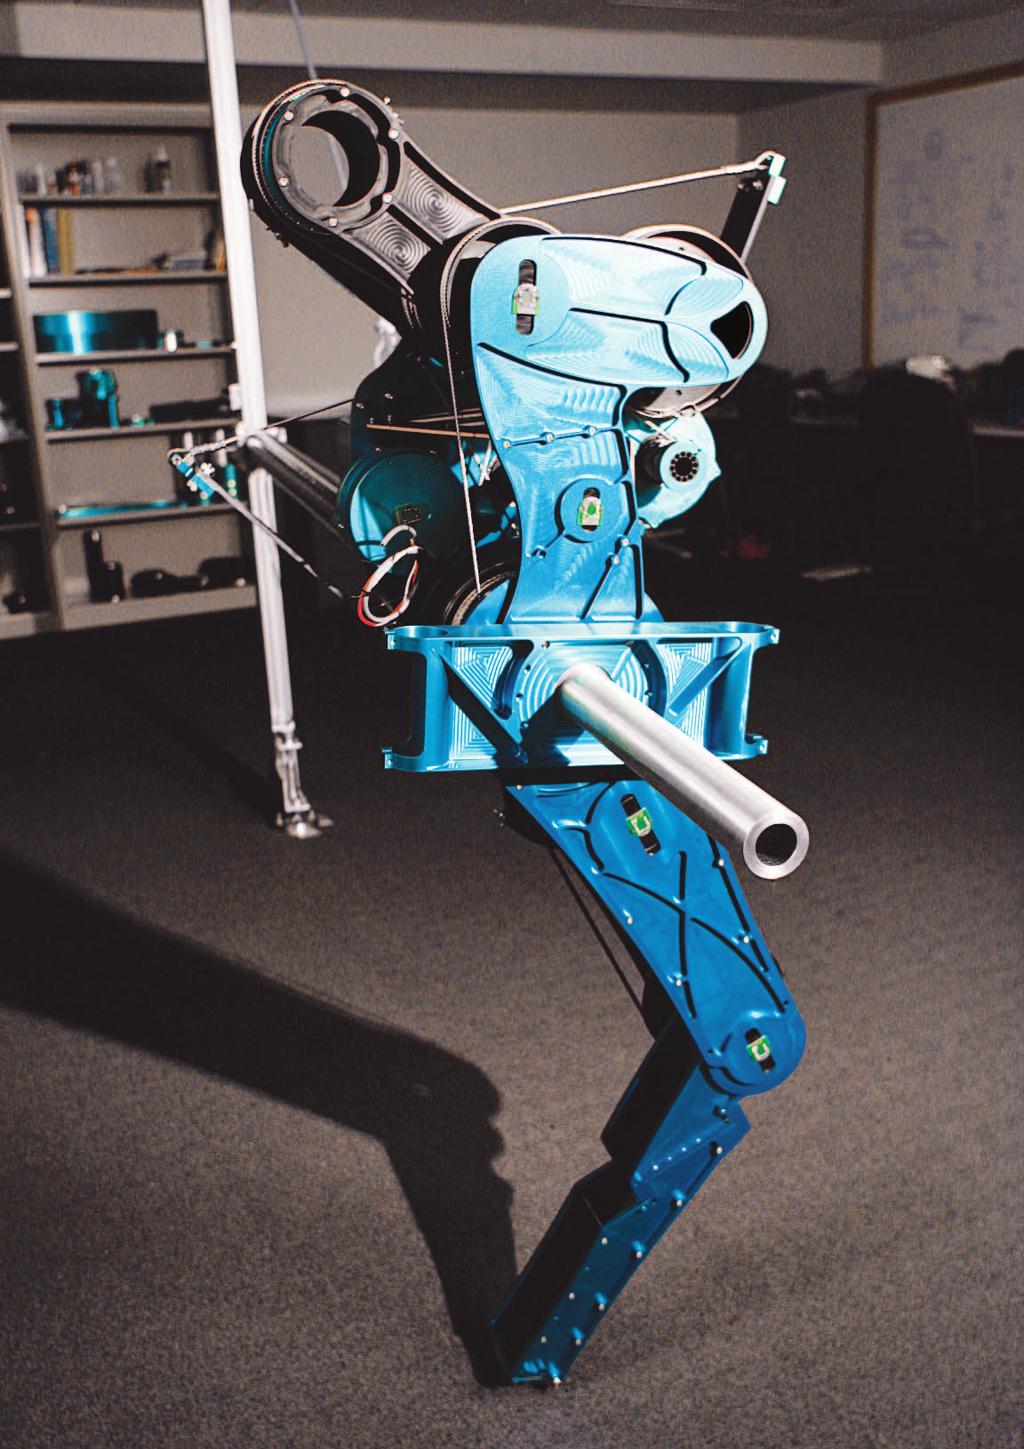 verify and refine several design ideas for leg joints of running and walking robots.